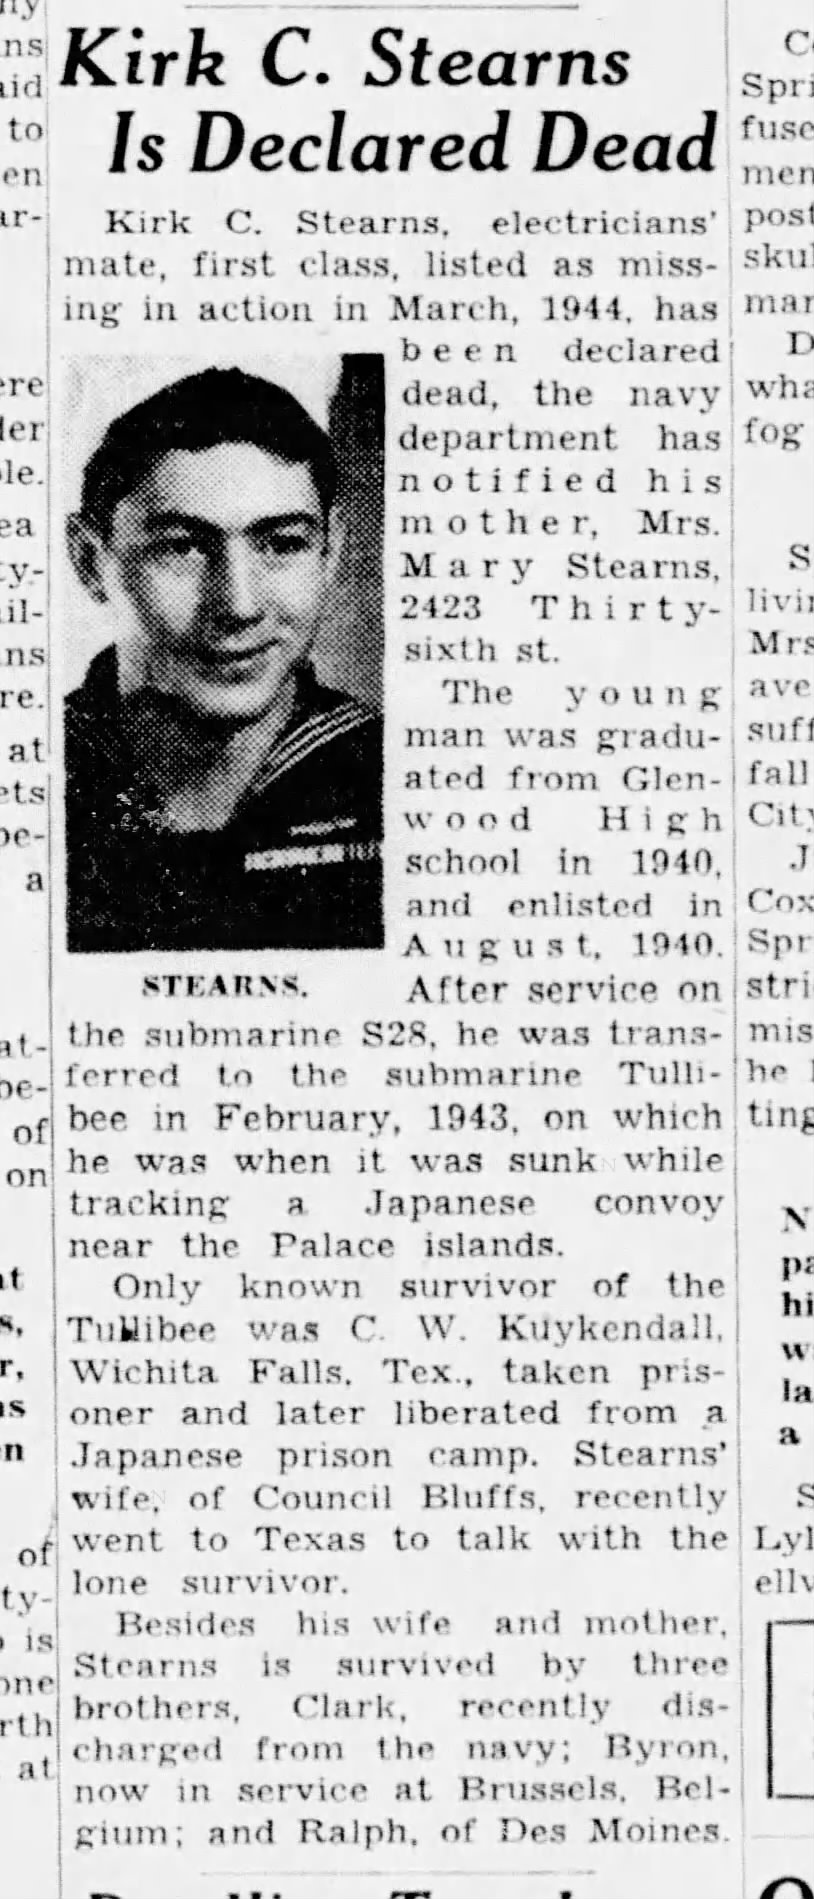 1946 obit for Stearns